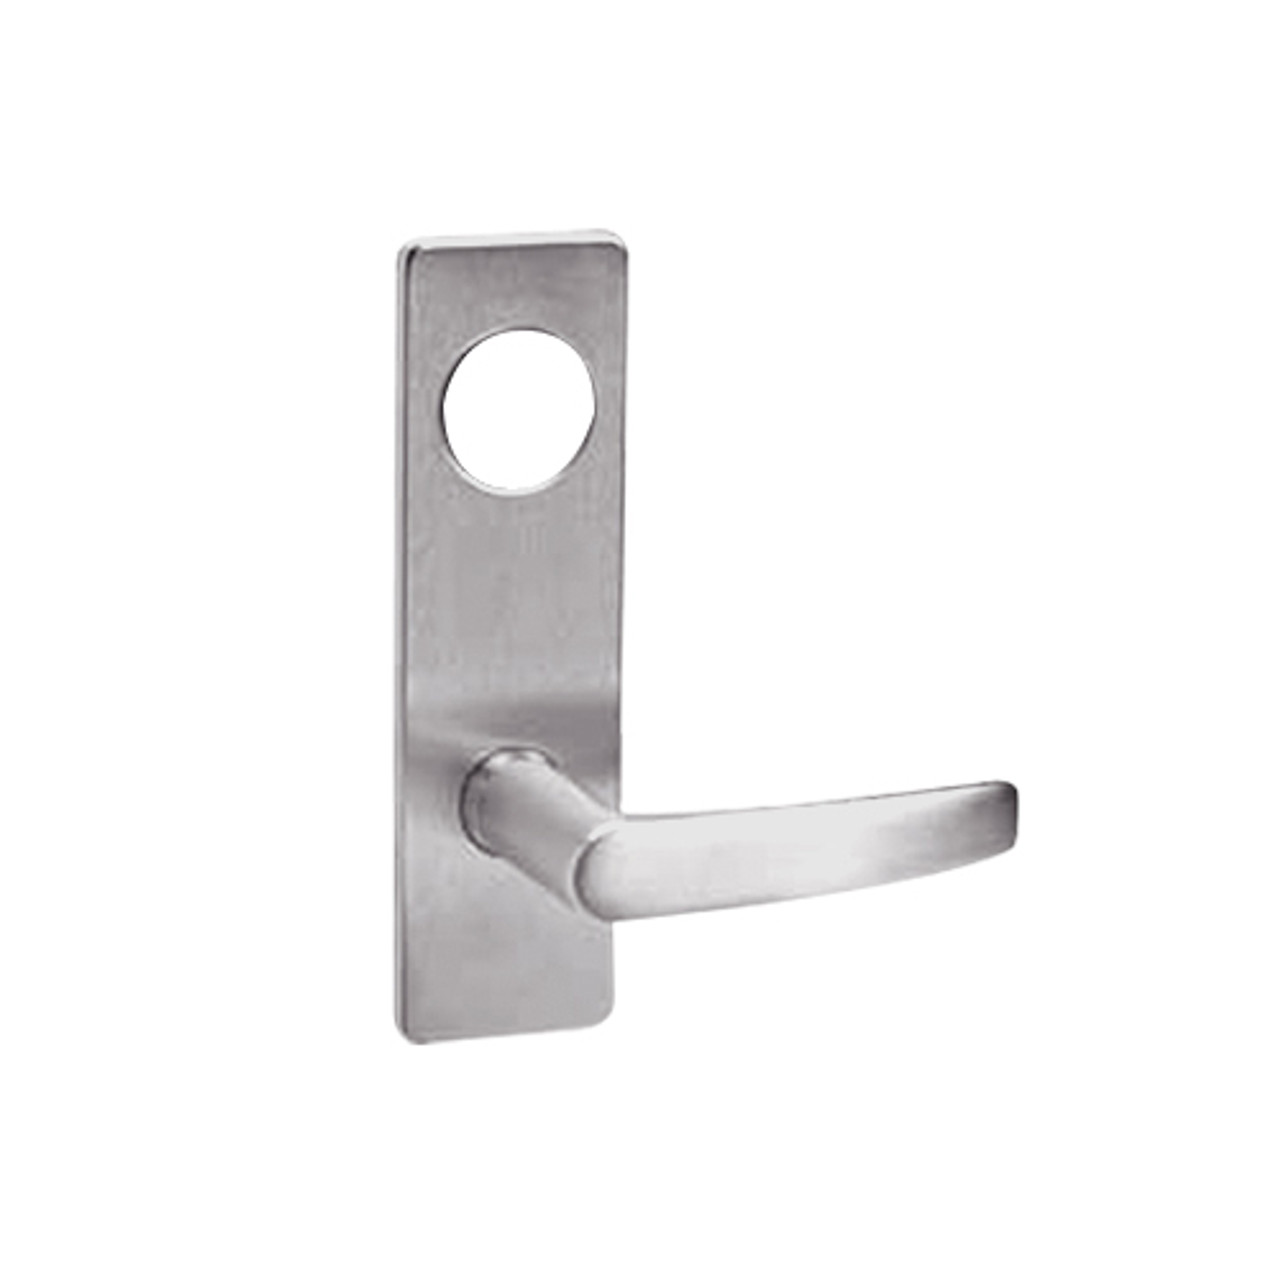 ML2057-ASM-630-M31 Corbin Russwin ML2000 Series Mortise Storeroom Trim Pack with Armstrong Lever in Satin Stainless